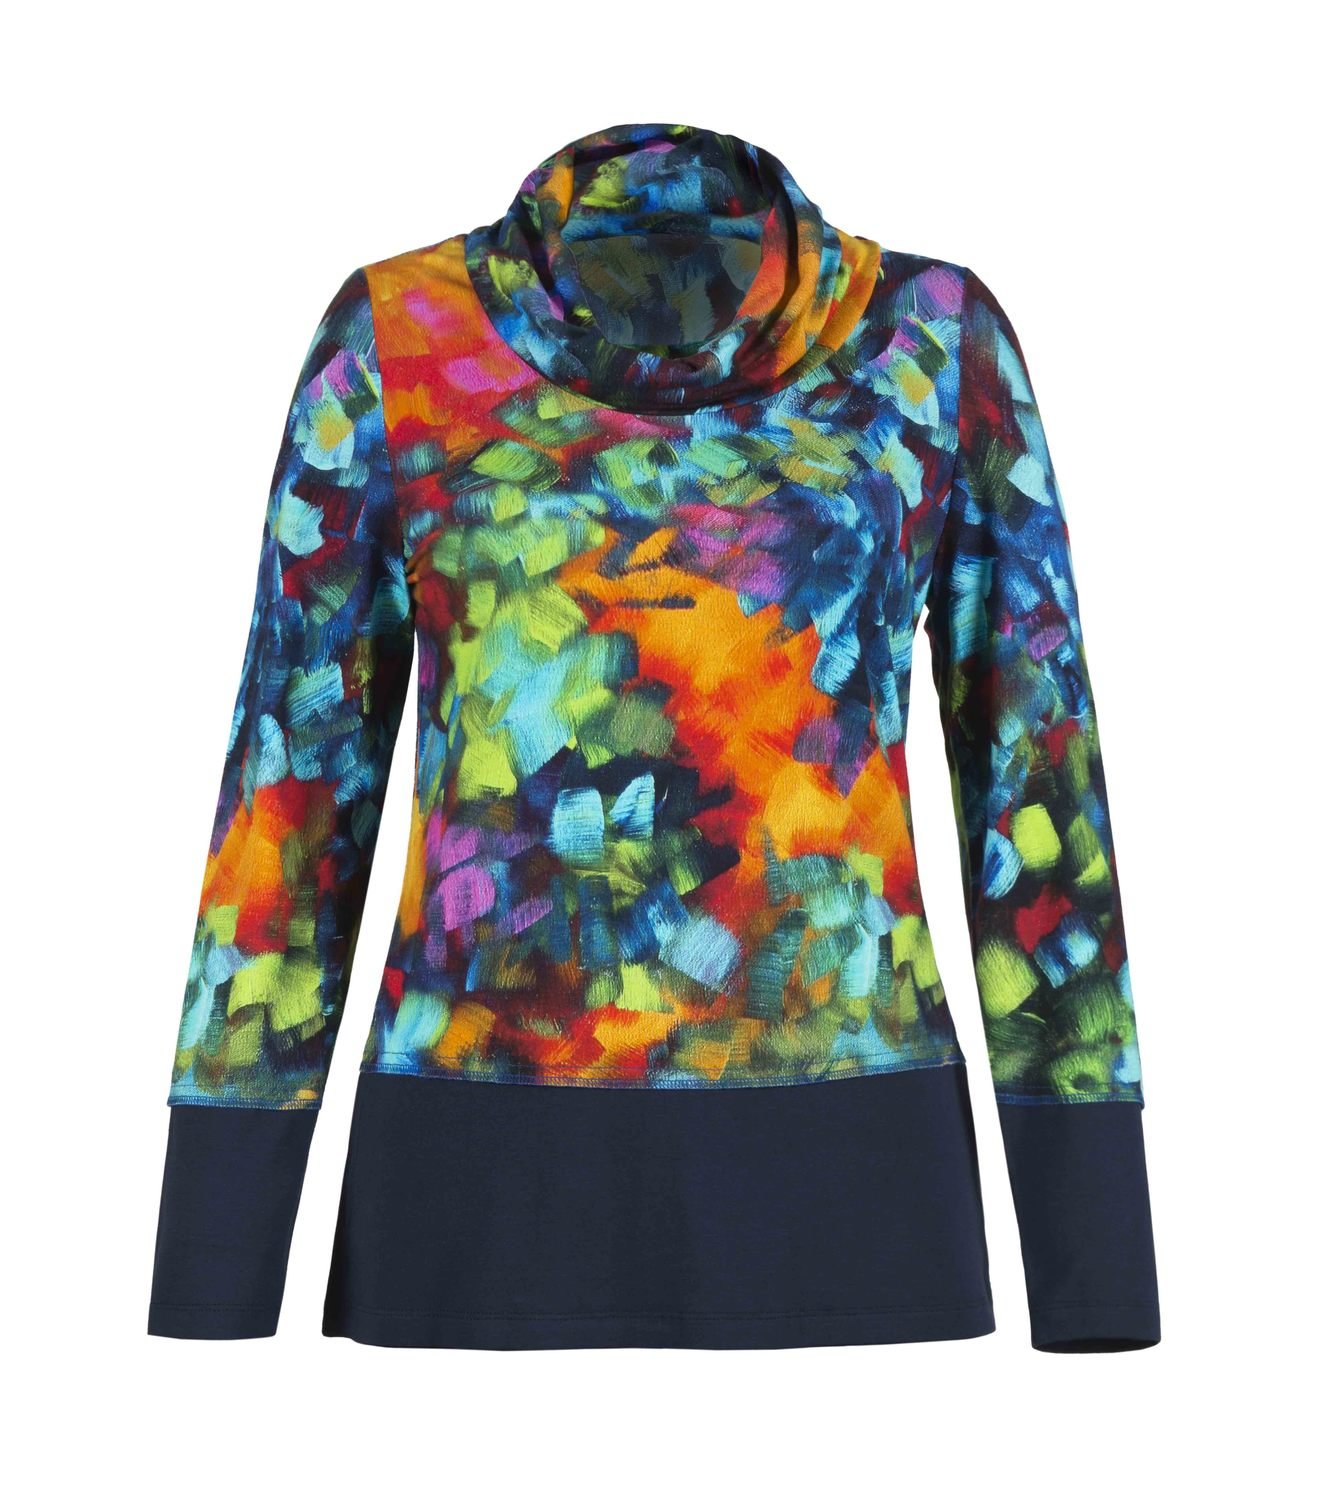 Simply Art Dolcezza: Prismatic Petals Abstract Art Tunic SOLD OUT